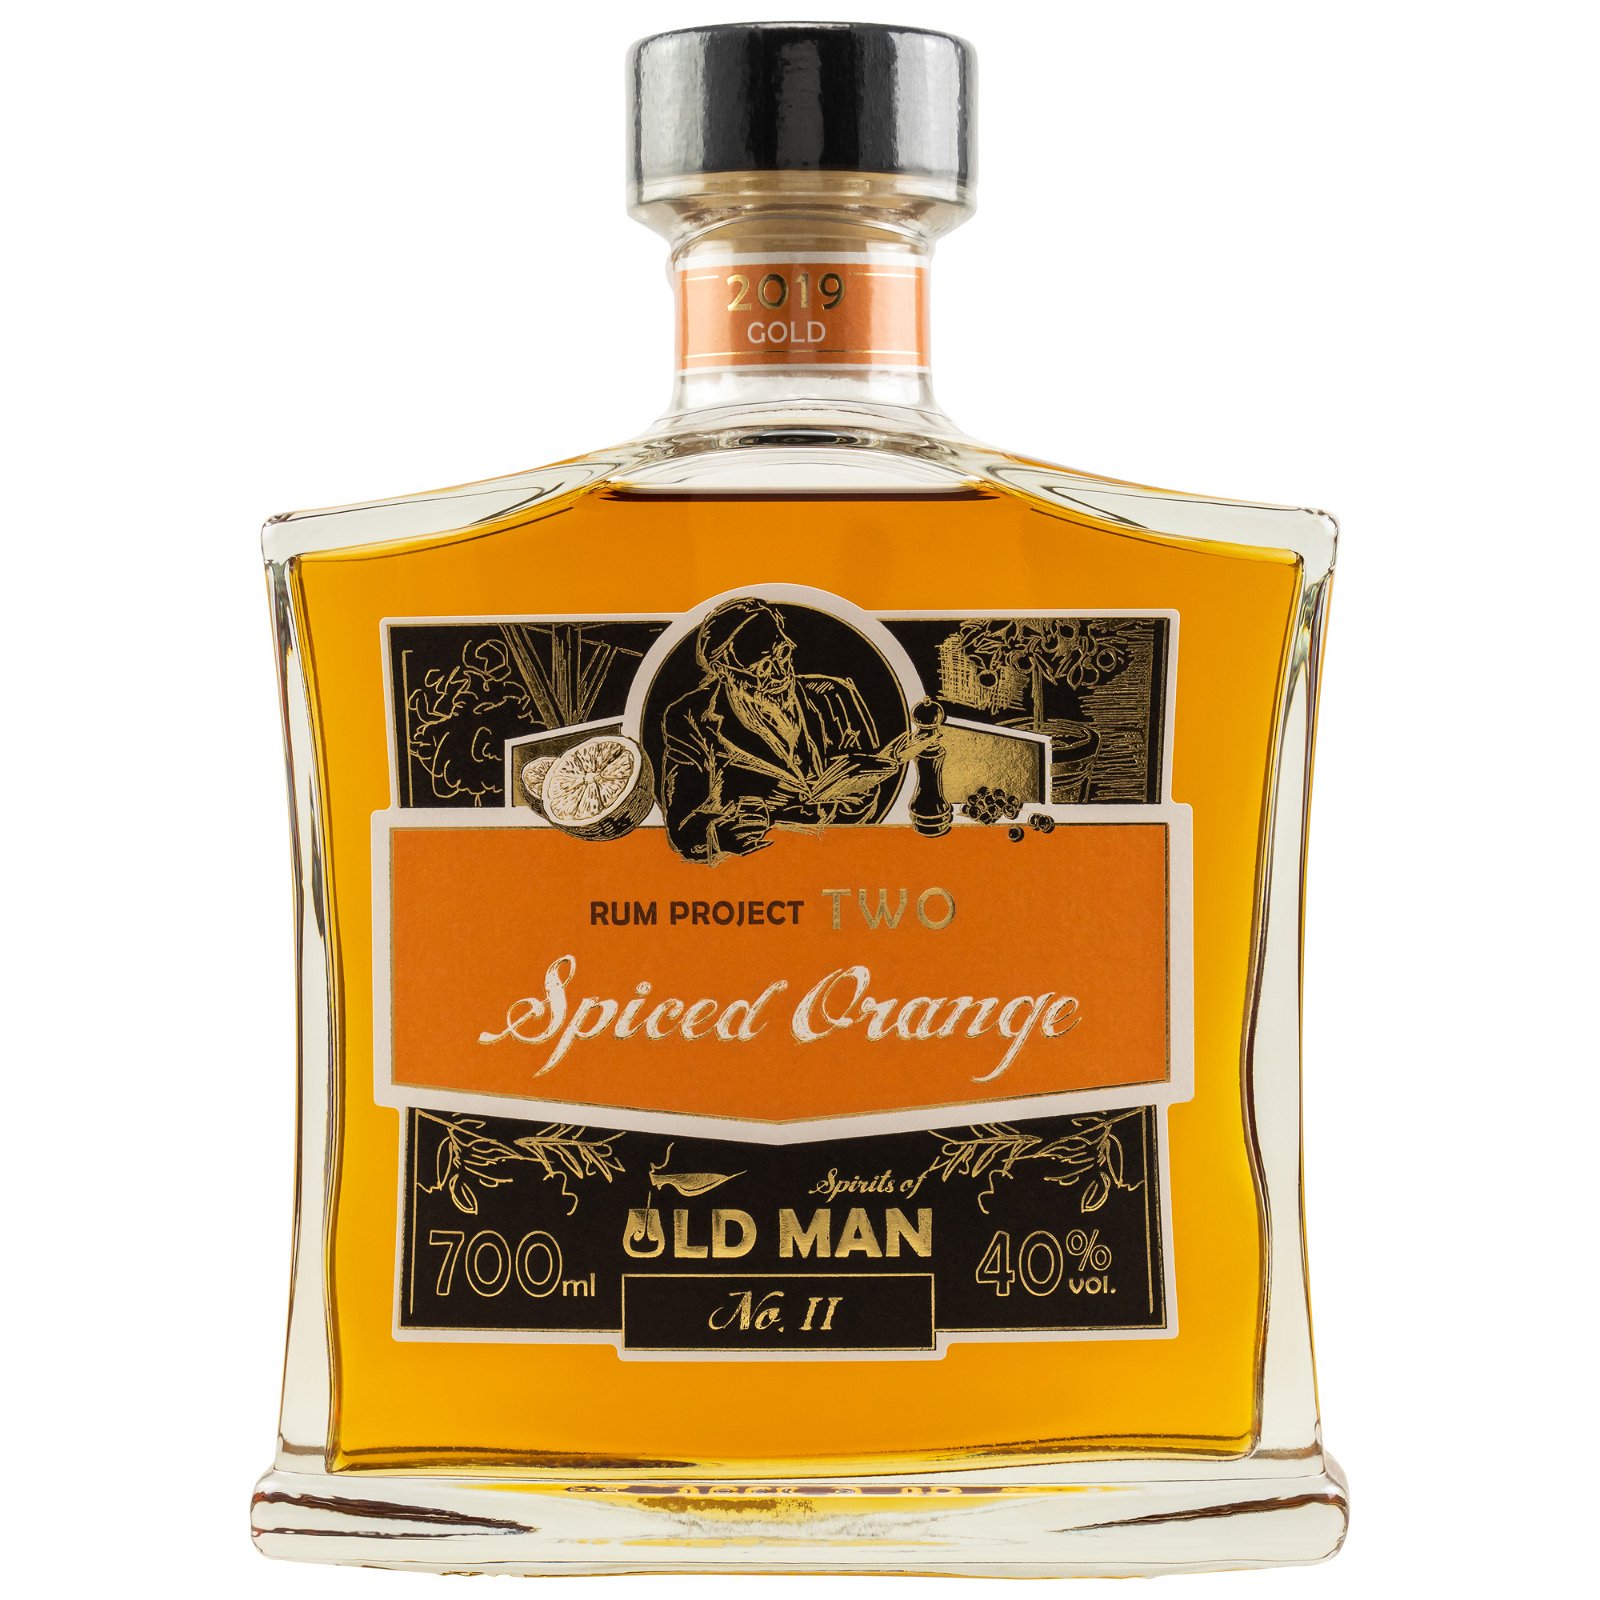 Spirits of Old Man Rum Project Two Spiced Orange 2019